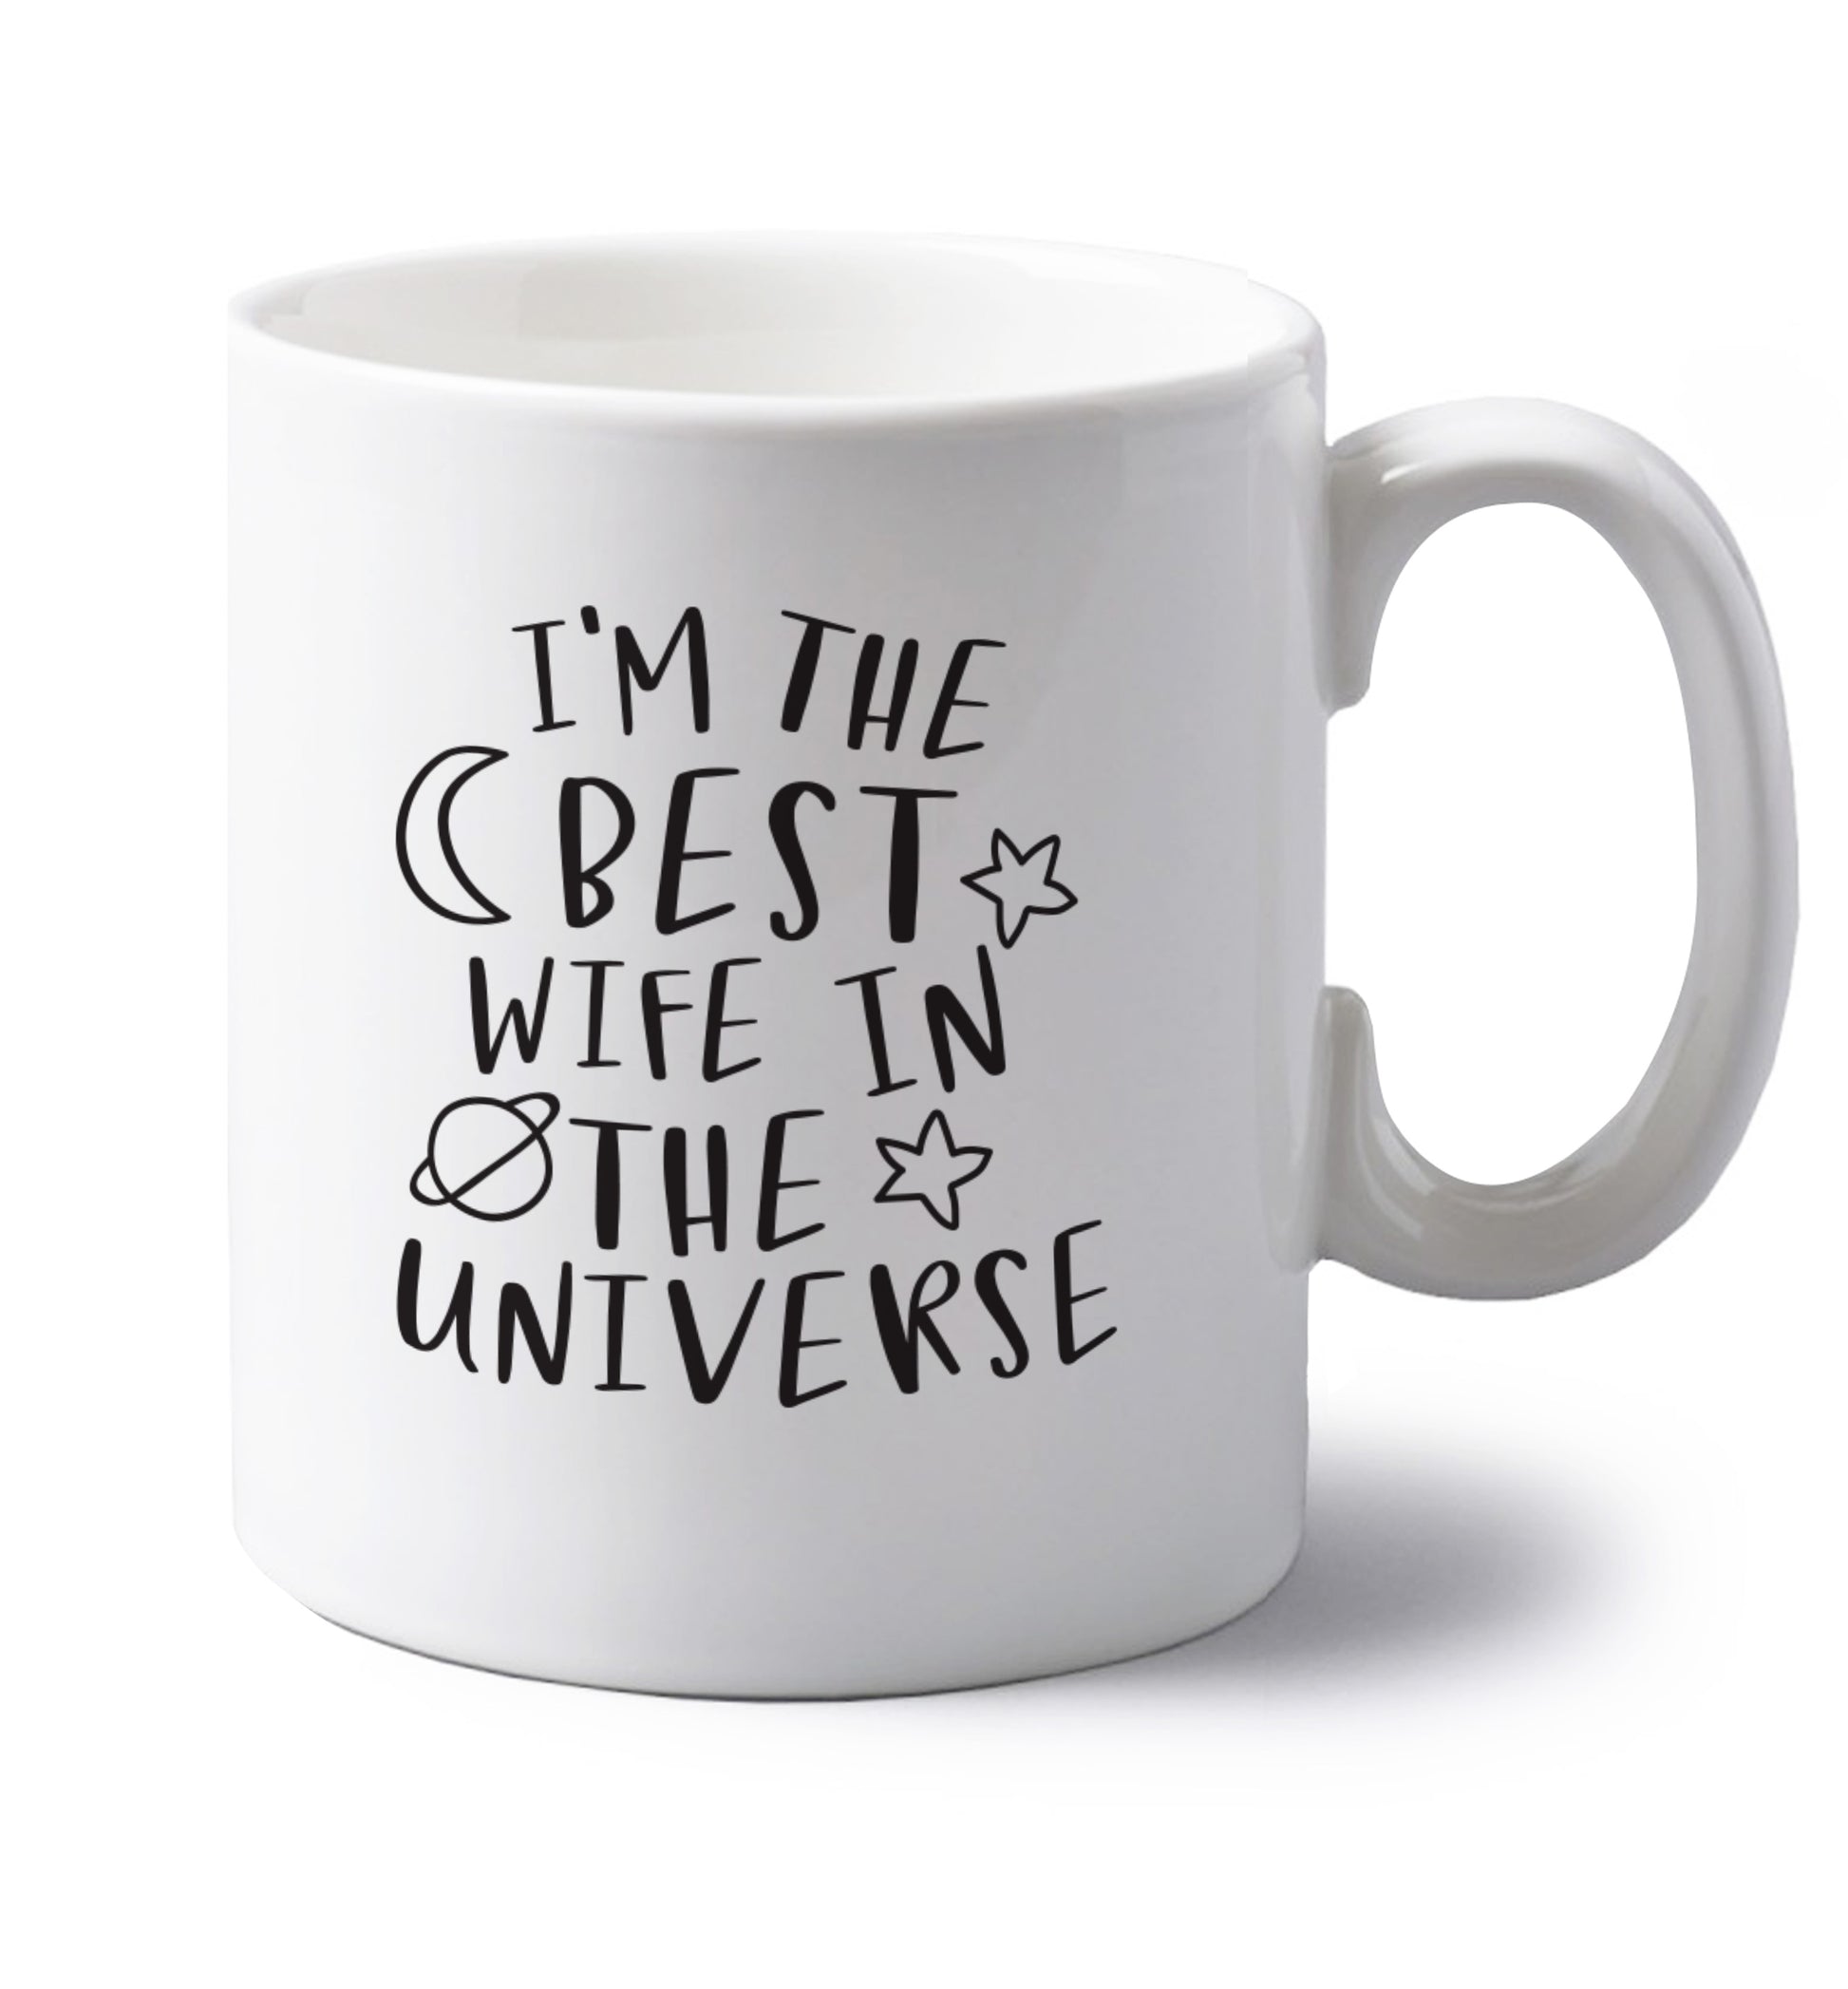 I'm the best wife in the universe left handed white ceramic mug 